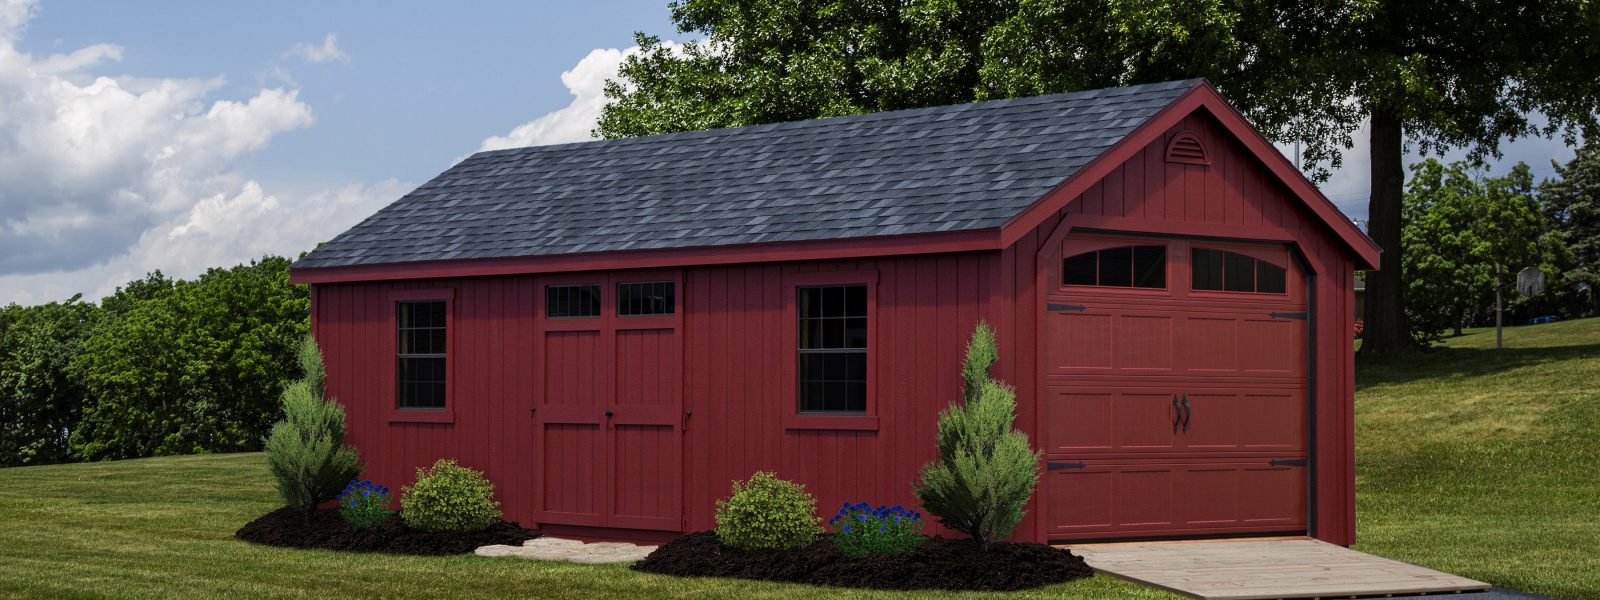 portable buildings for sale in WI and MN cape cod prefab garages